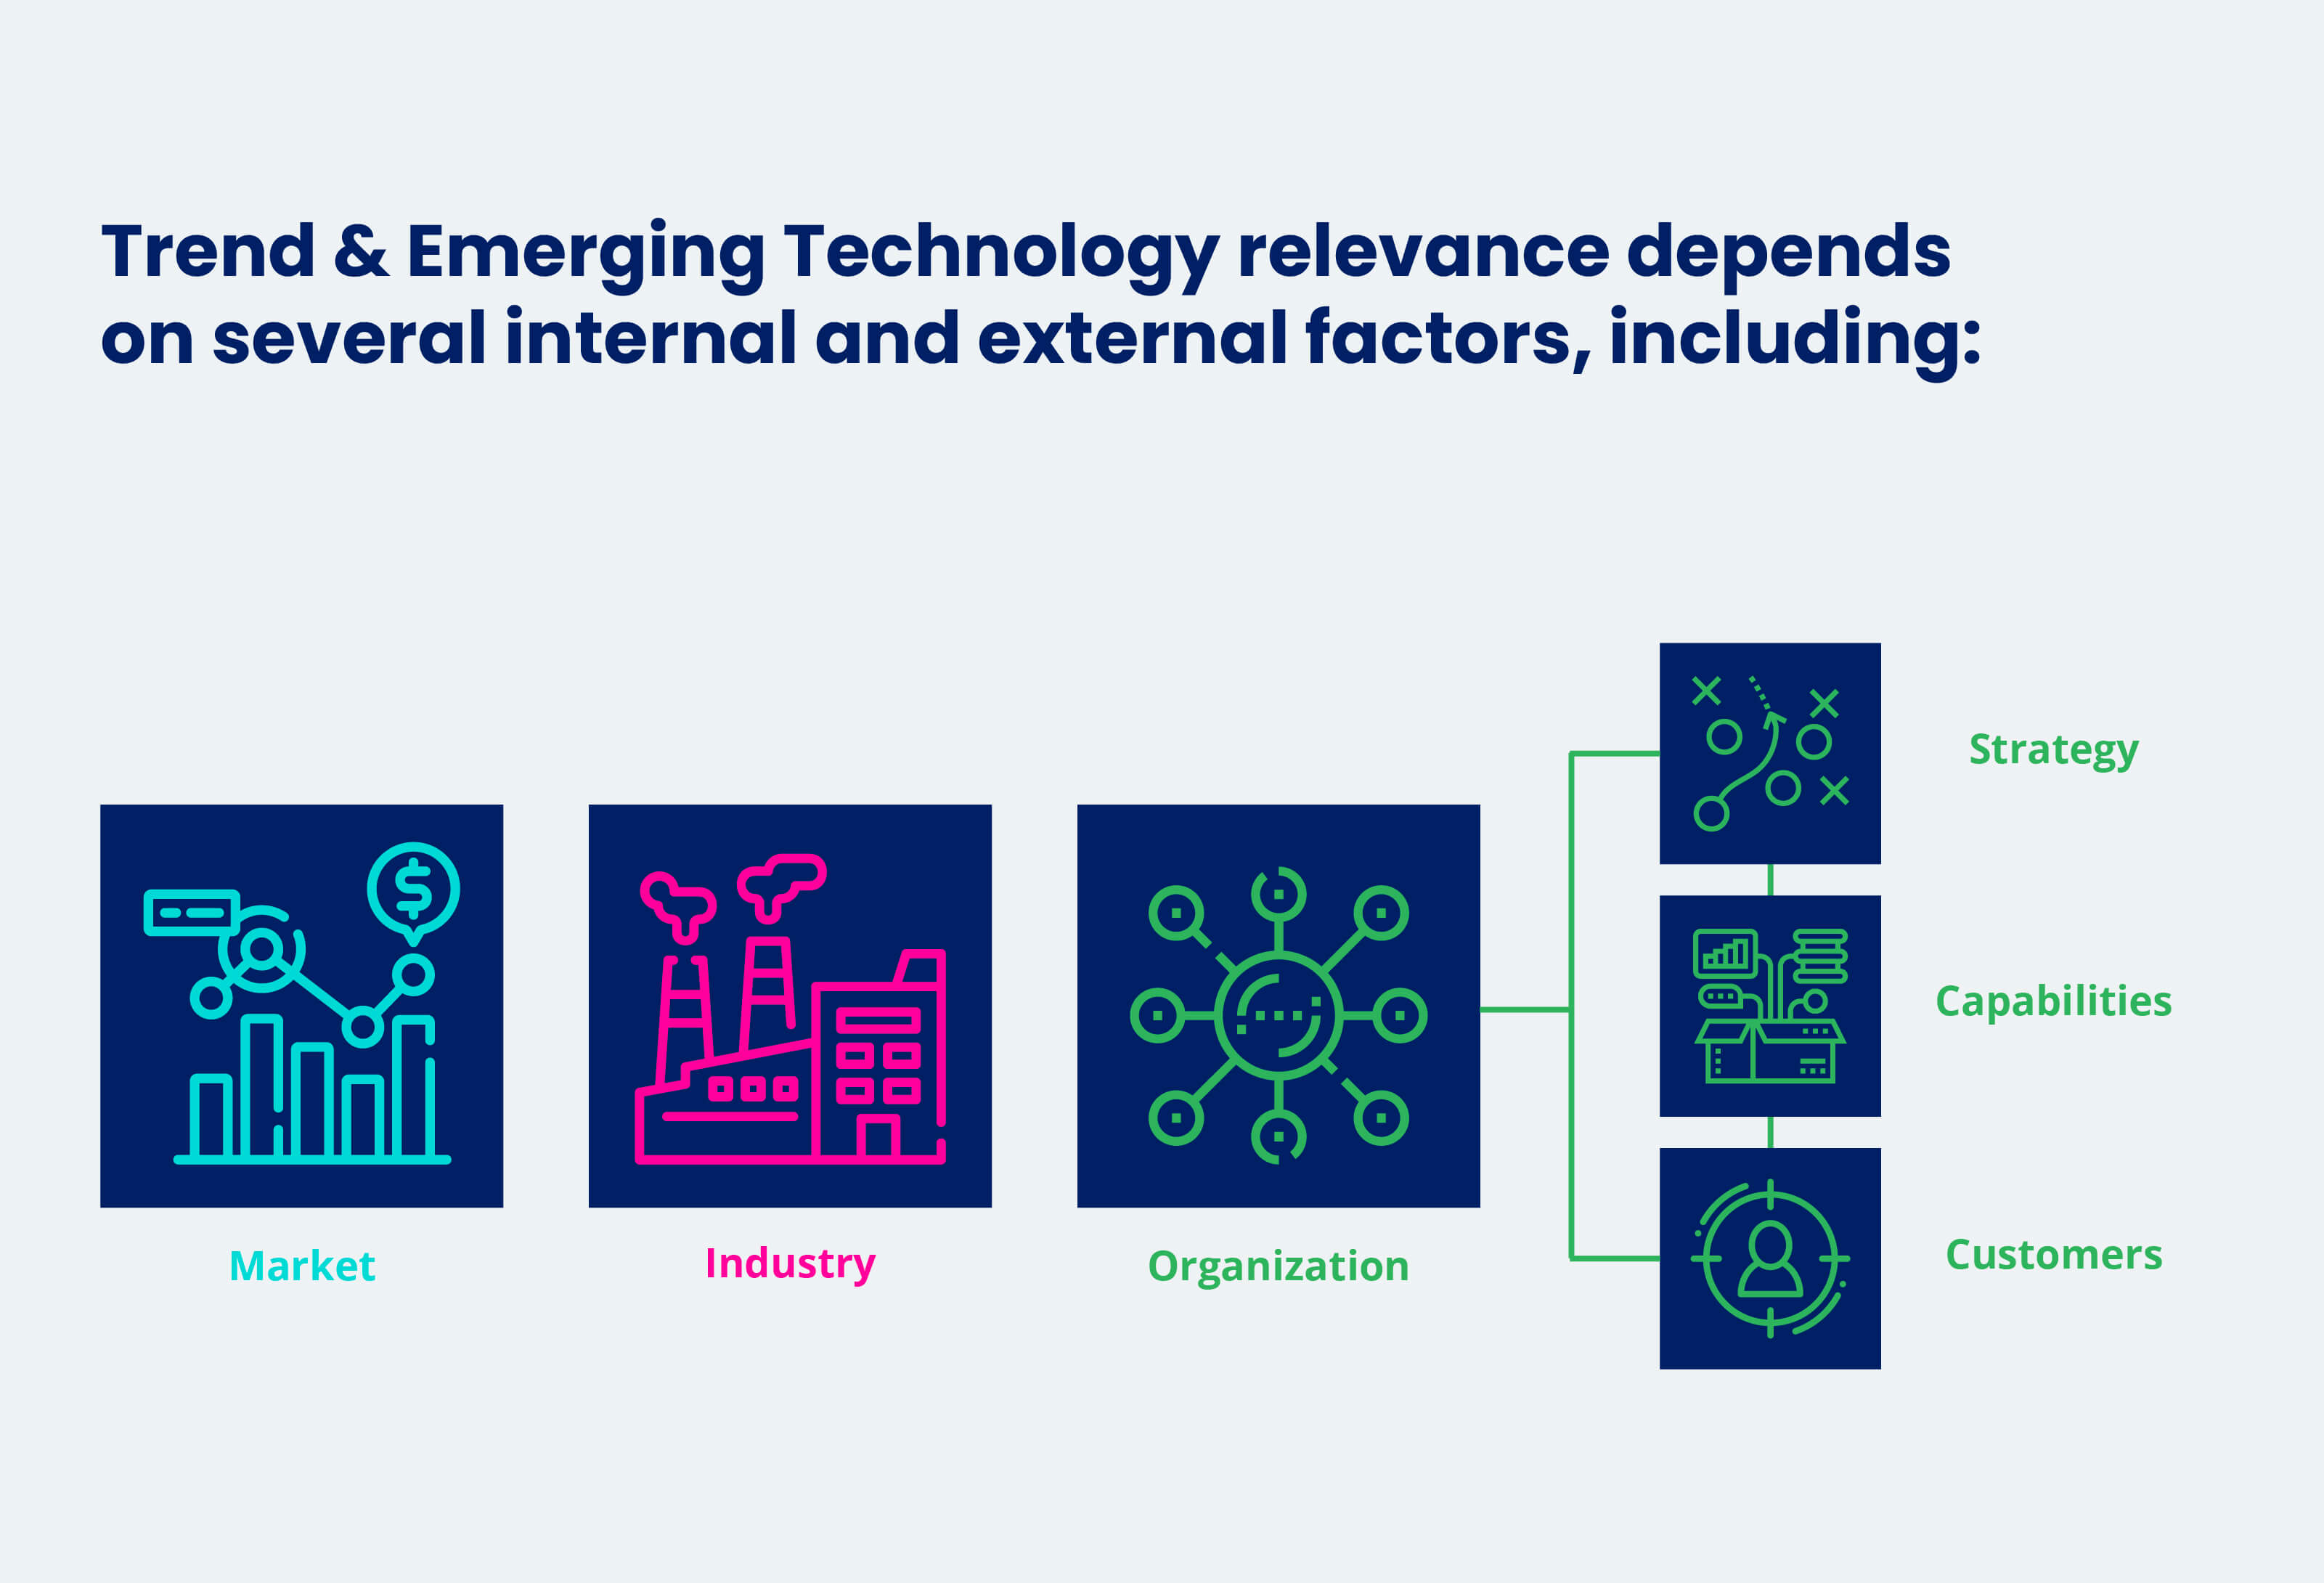 Infographic showing how technological trends & emerging technology relevance depend on internal & external factors